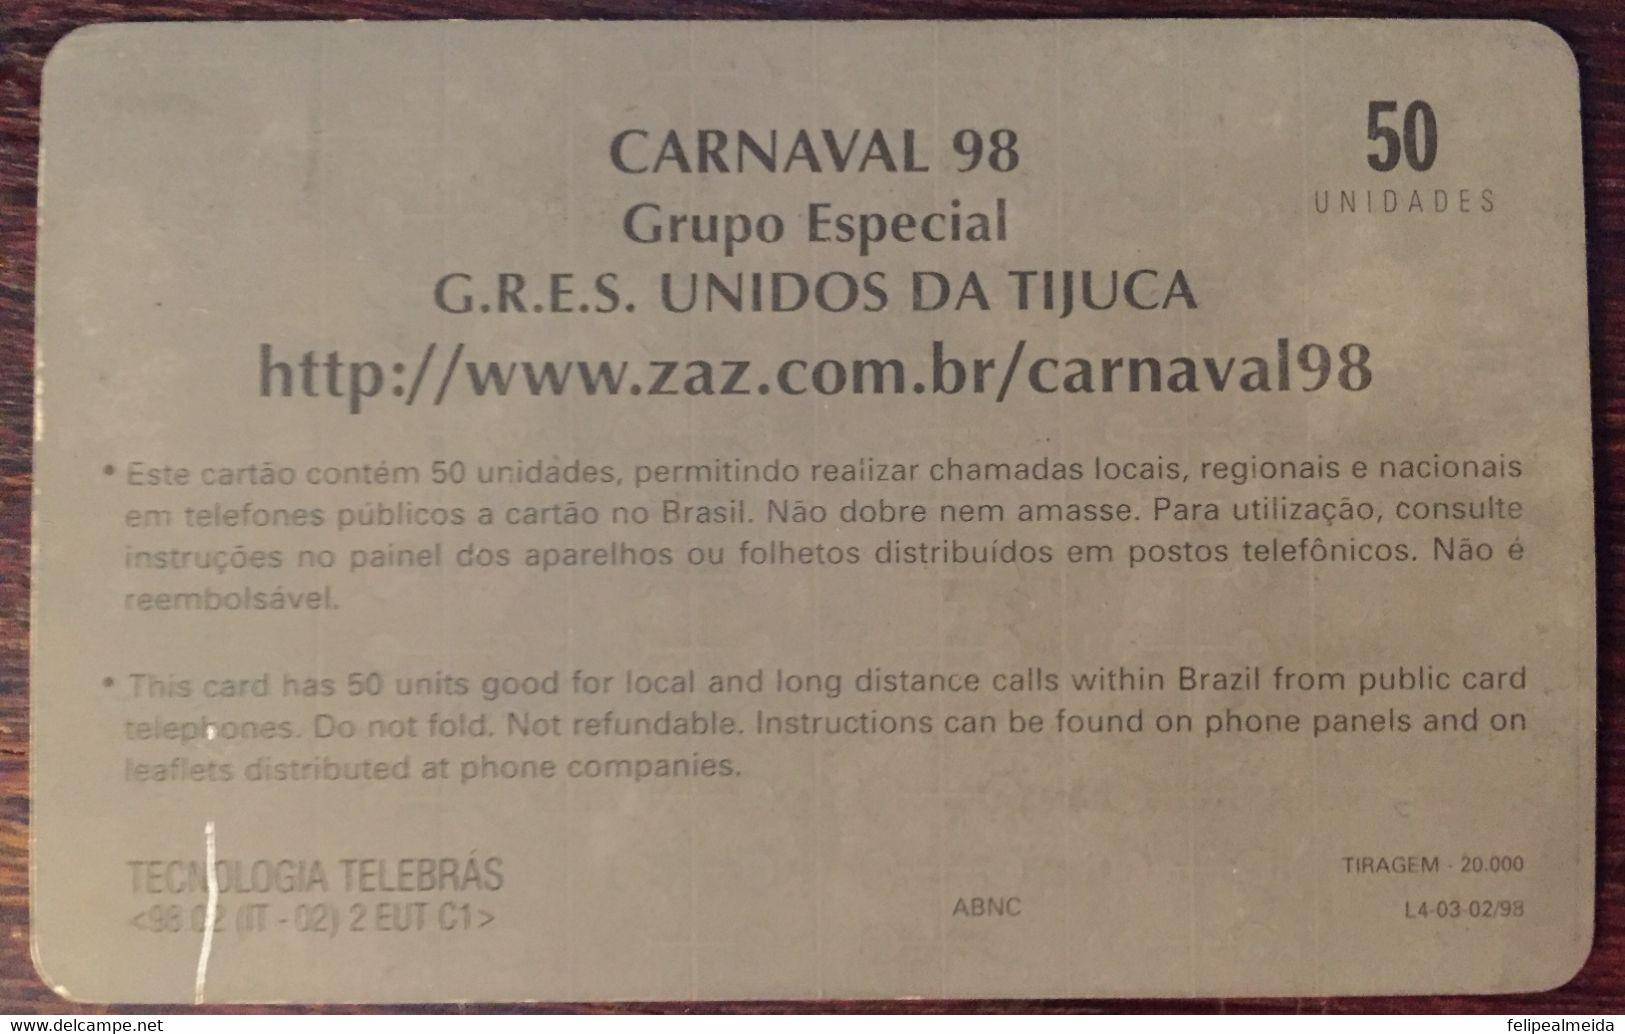 Phone Card Manufactured By Telebras In 1998 - Carnival Of 1998 - Series Special Group Of Samba Schools Of Rio De Jan - Cultural